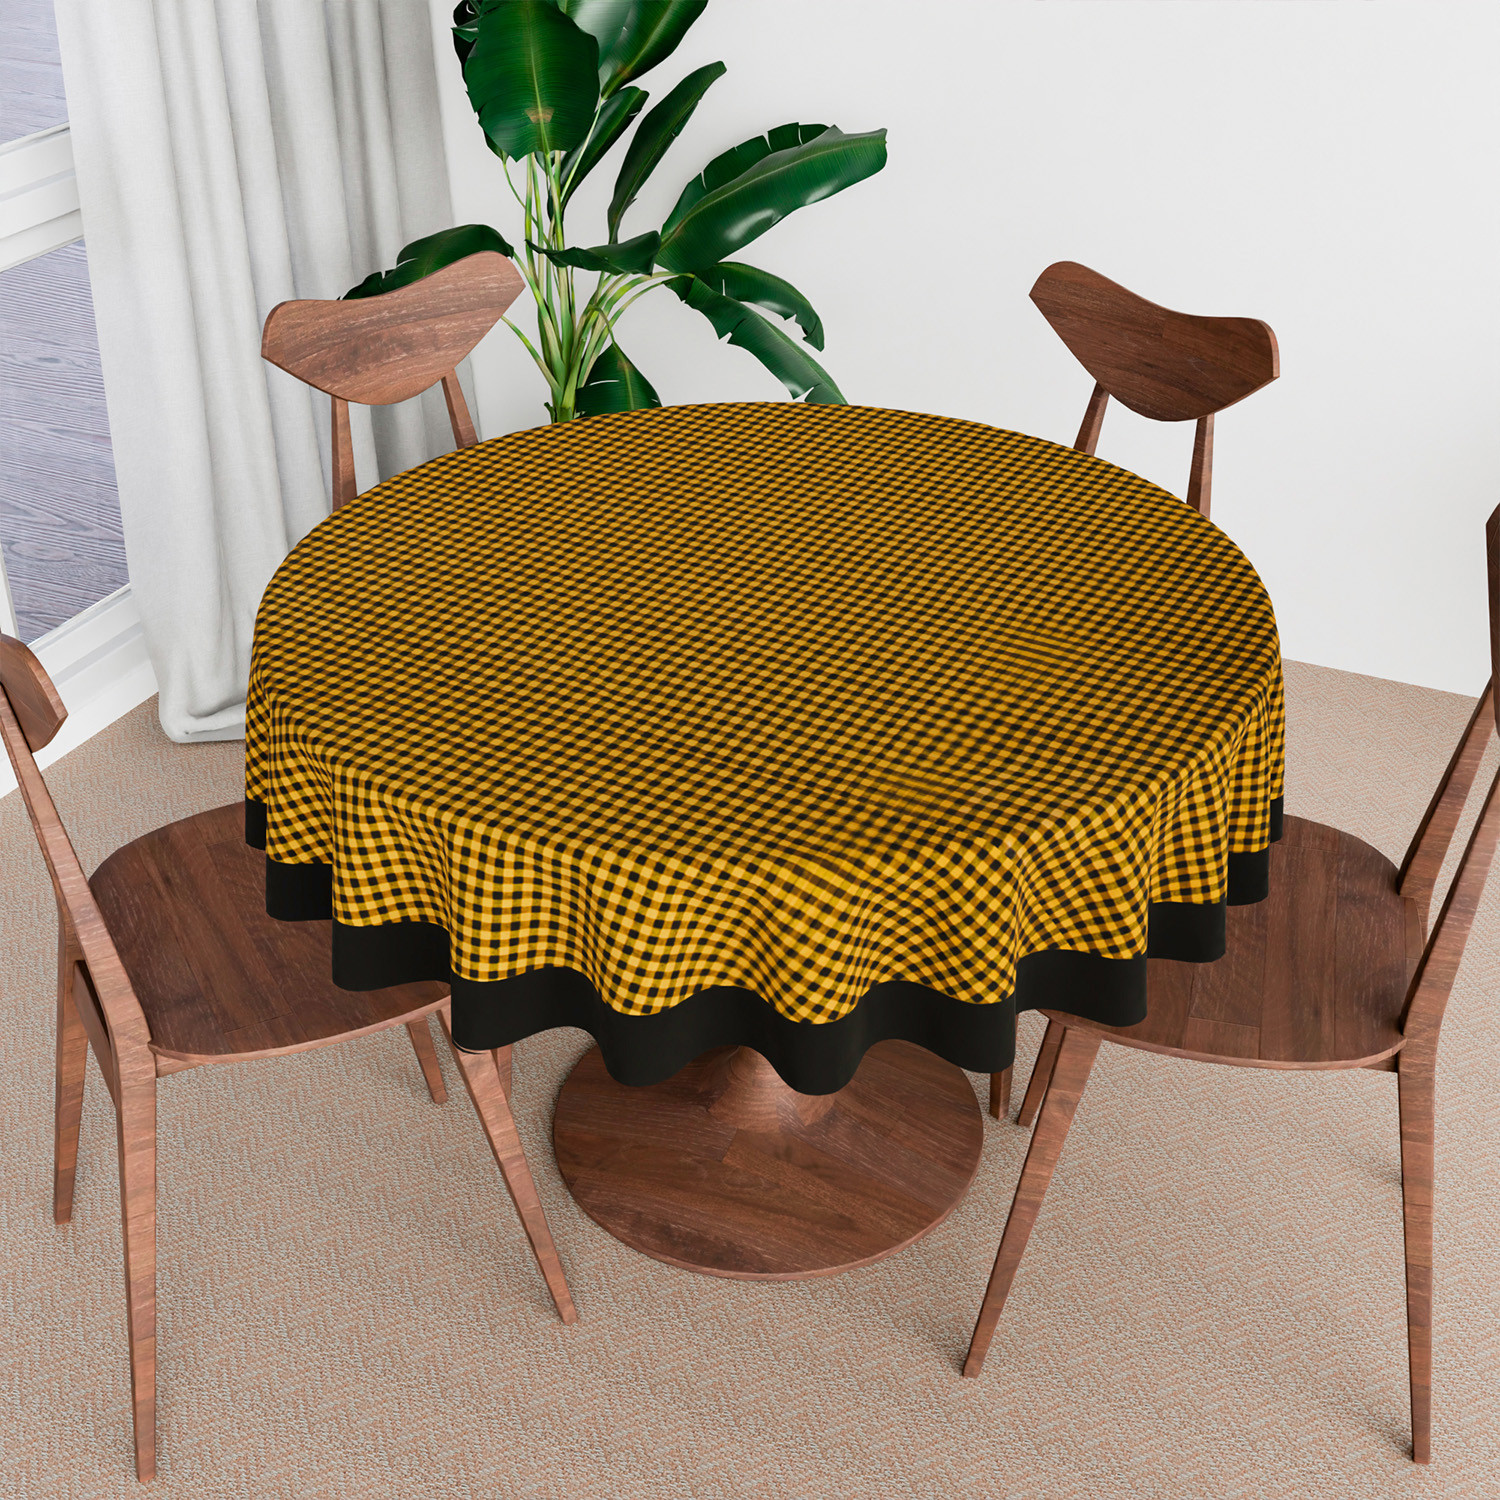 Kuber Industries Round Table Cover | Cotton Table Cloth for Round Tables | 4 Seater Round Table Cloth | Barik Check Kitchen Dining Tablecloth | Tabletop Cover | 60 Inch | Yellow